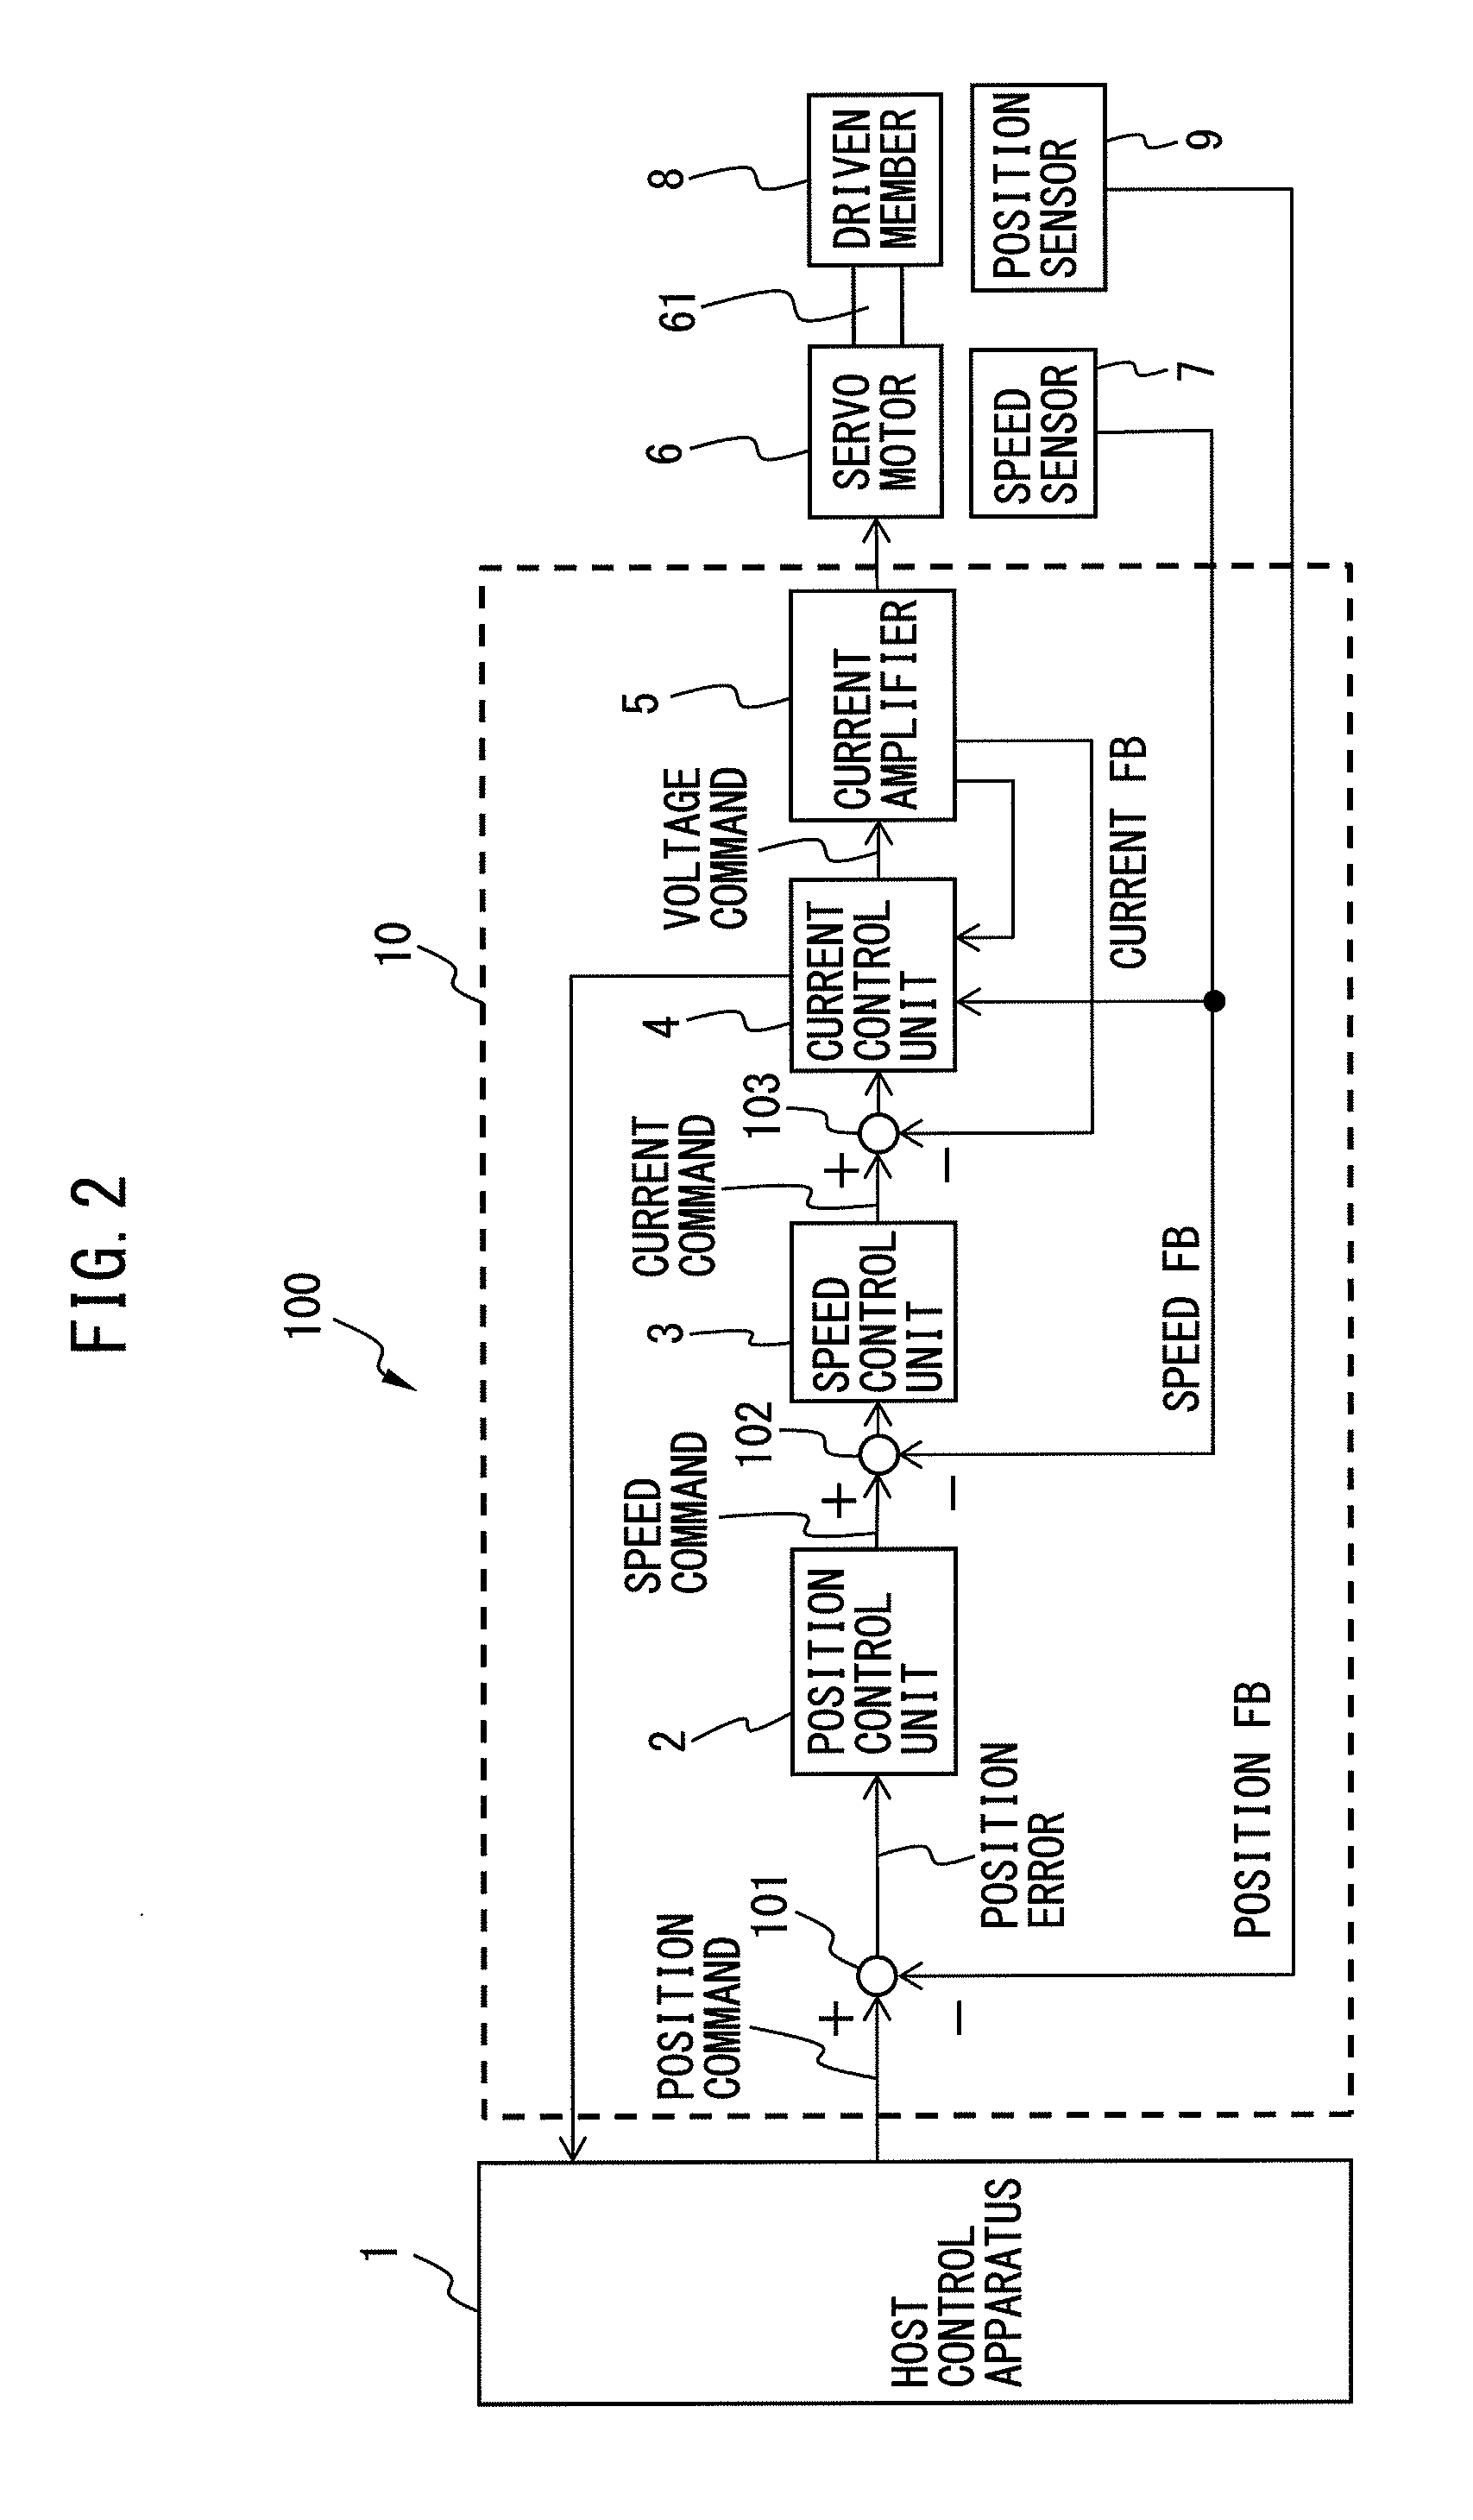 Motor control system that detects voltage saturation